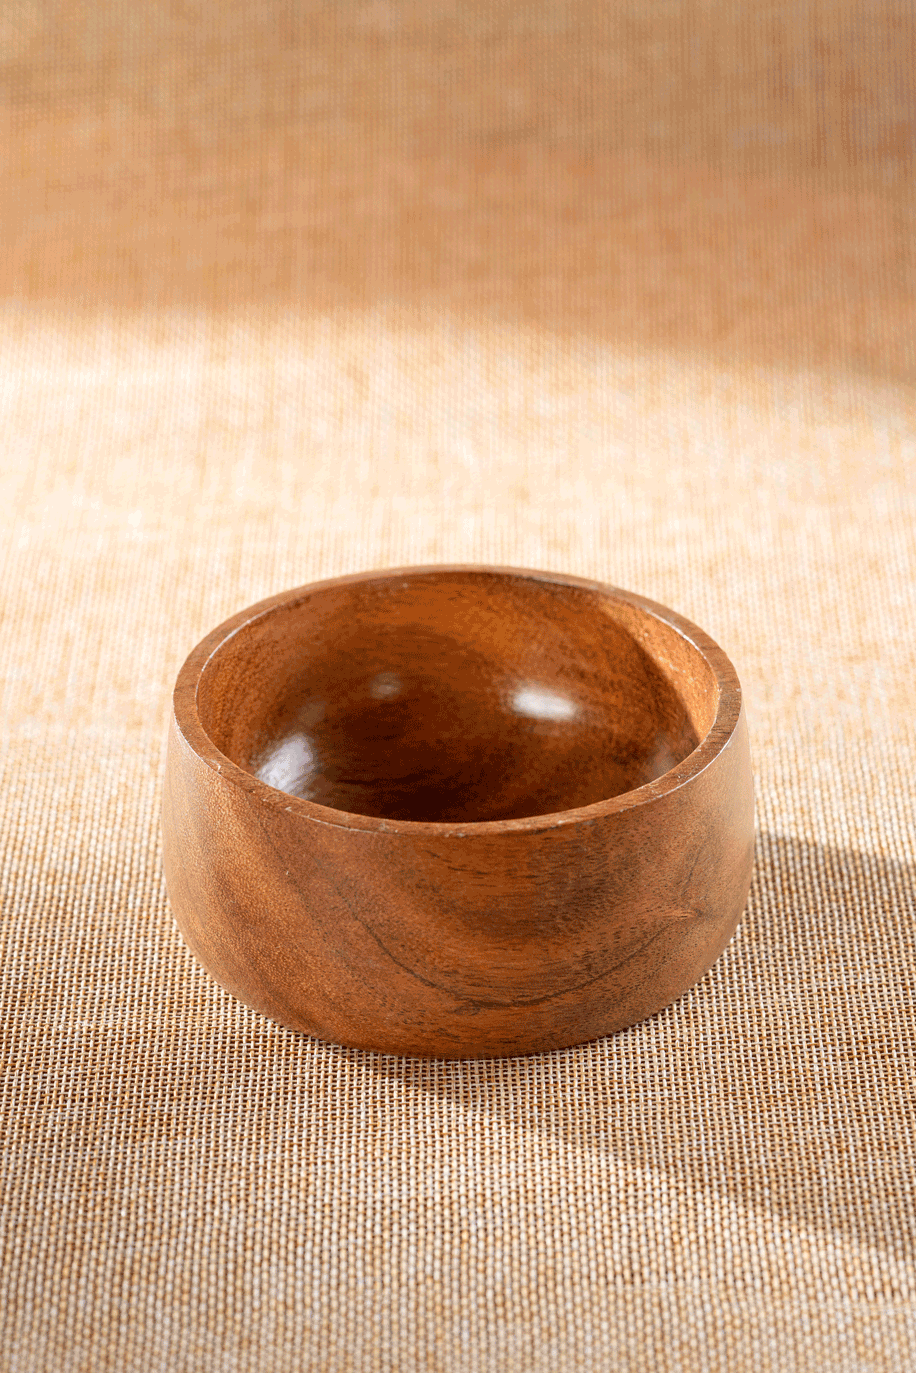 Thumbnail preview #2 for Gumbad - Small wooden dip bowls (set of 2)